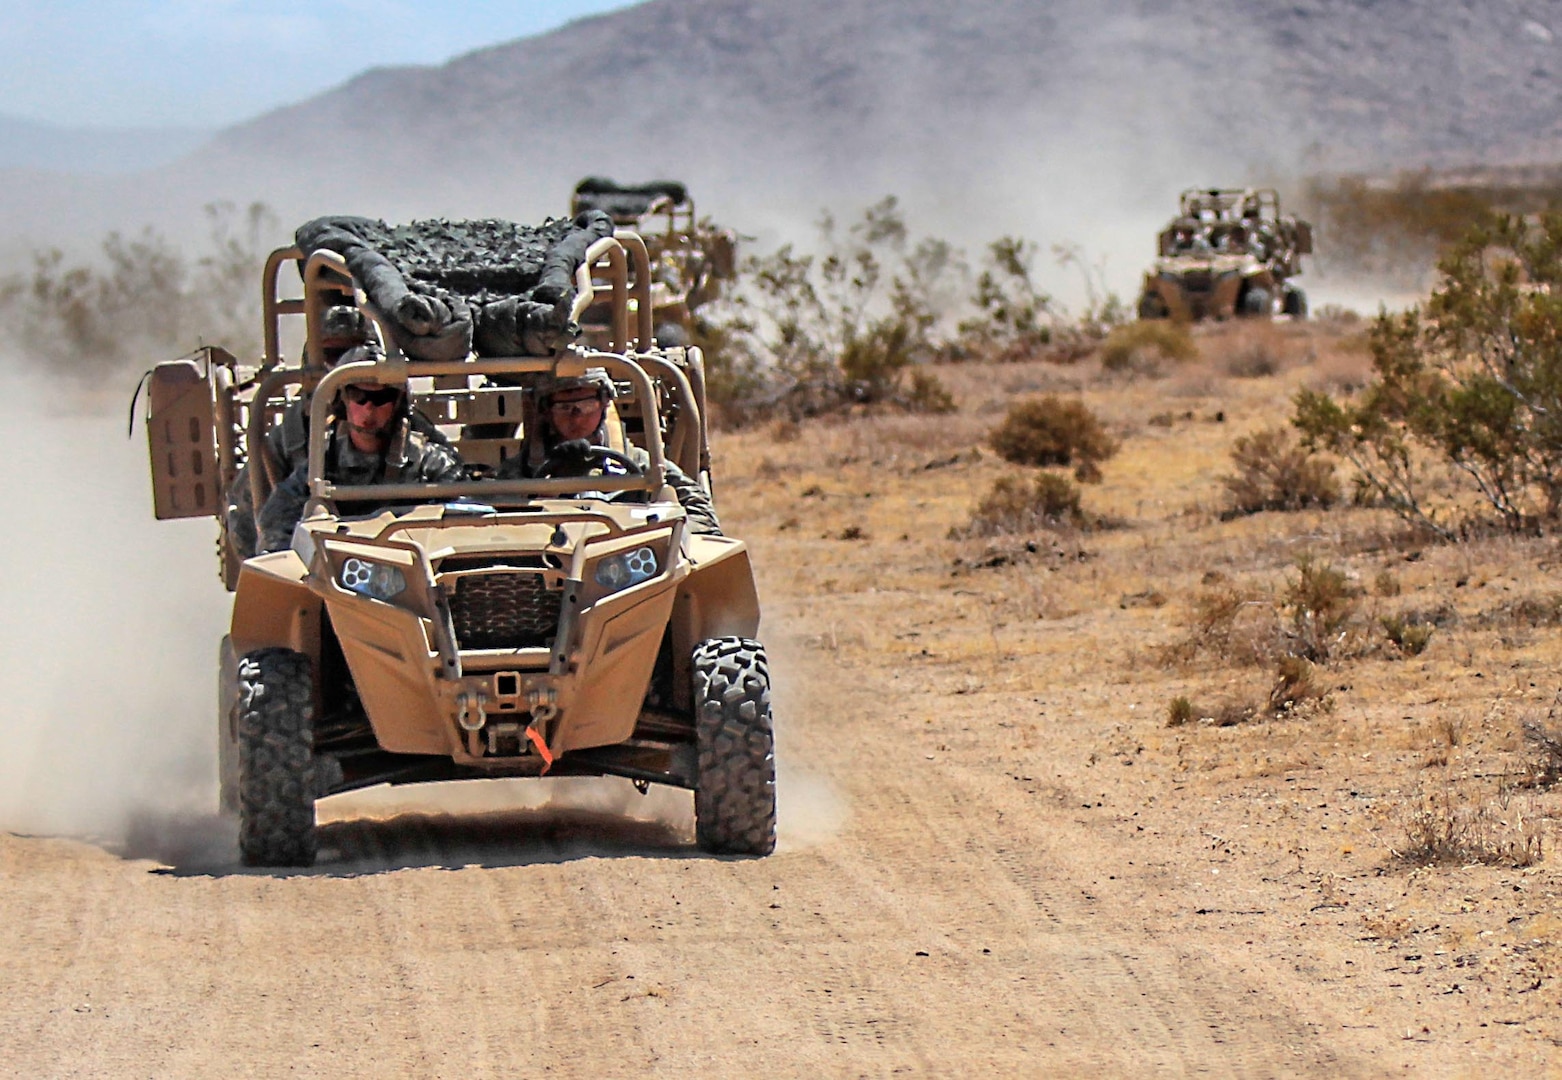 Paratroopers with the 82nd Airborne Division operate ultra-light combat vehicles during a training exercise at the National Training Center at Fort Irwin, California, Aug. 11, 2015. Defense Logistics Agency Troop Support’s Construction and Equipment supply chain will provide the vehicles to the 82nd Airborne’s Global Response Force. Photo by Army Staff Sgt. Jason Hull